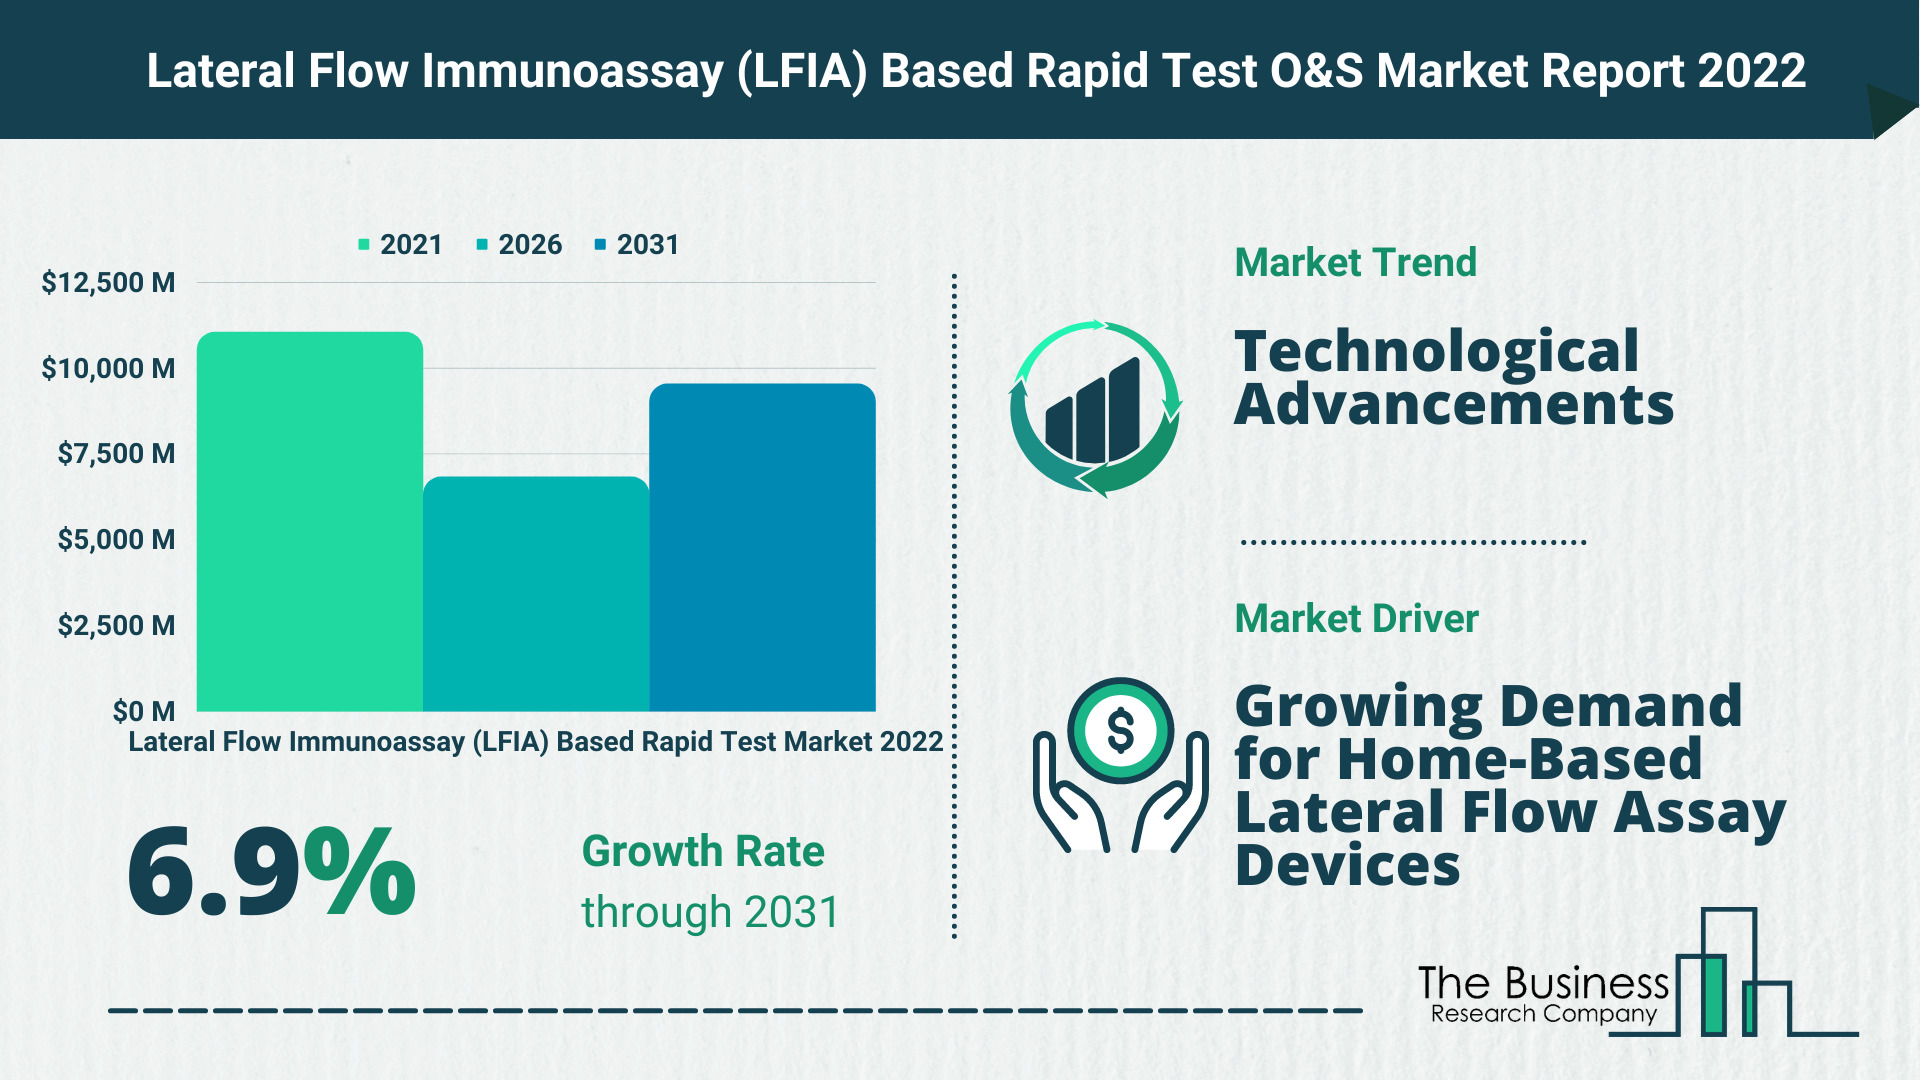 Global Lateral Flow Immunoassay (LFIA) Based Rapid Test Market 2022 – Market Opportunities And Strategies